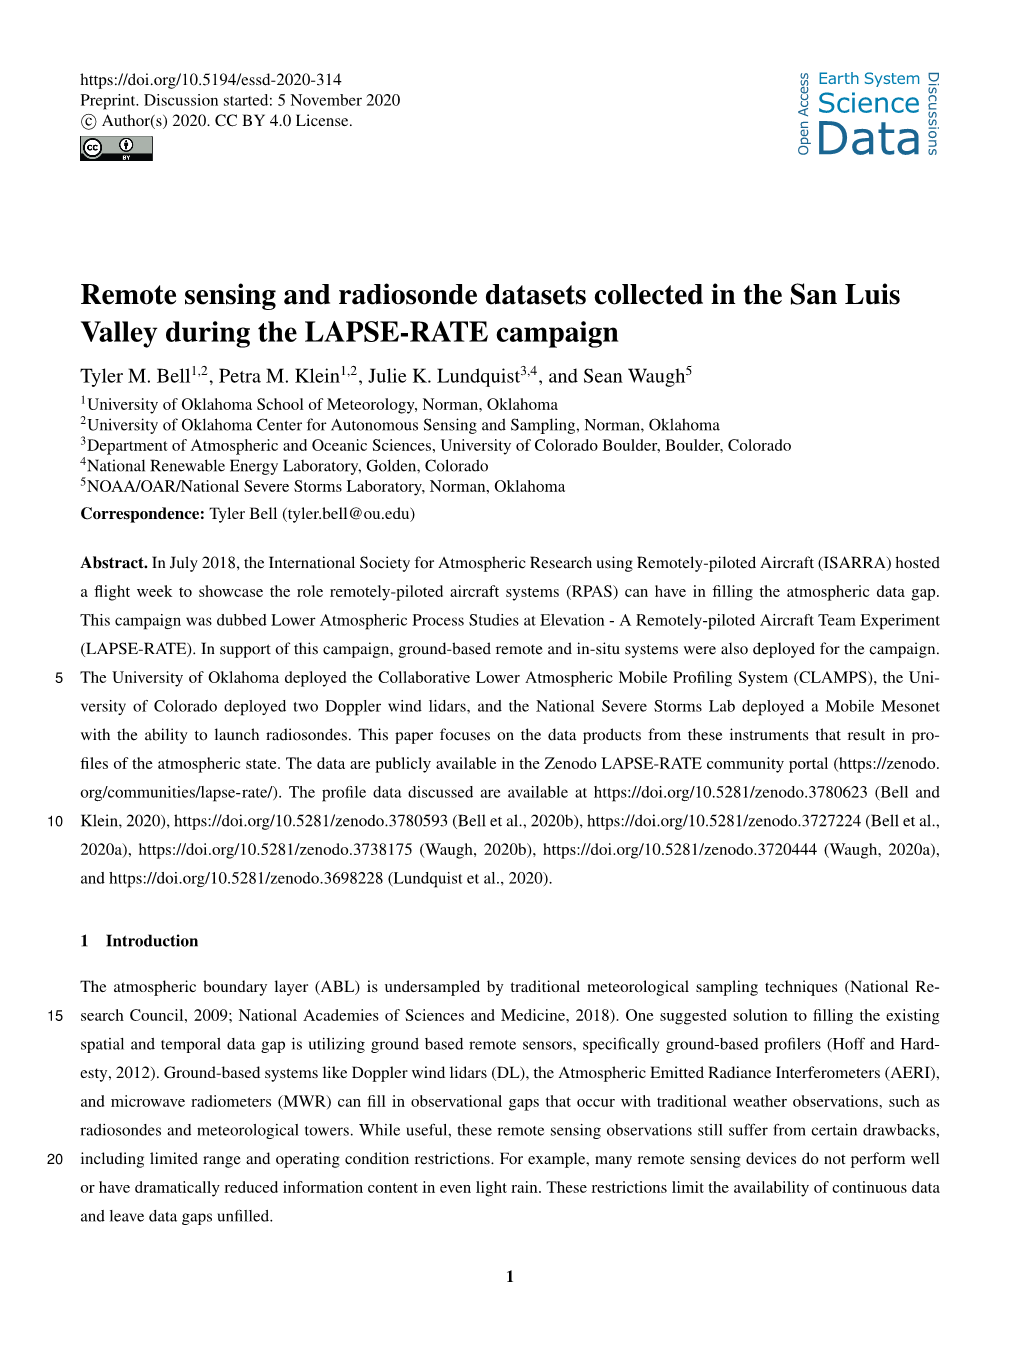 Remote Sensing and Radiosonde Datasets Collected in the San Luis Valley During the LAPSE-RATE Campaign Tyler M